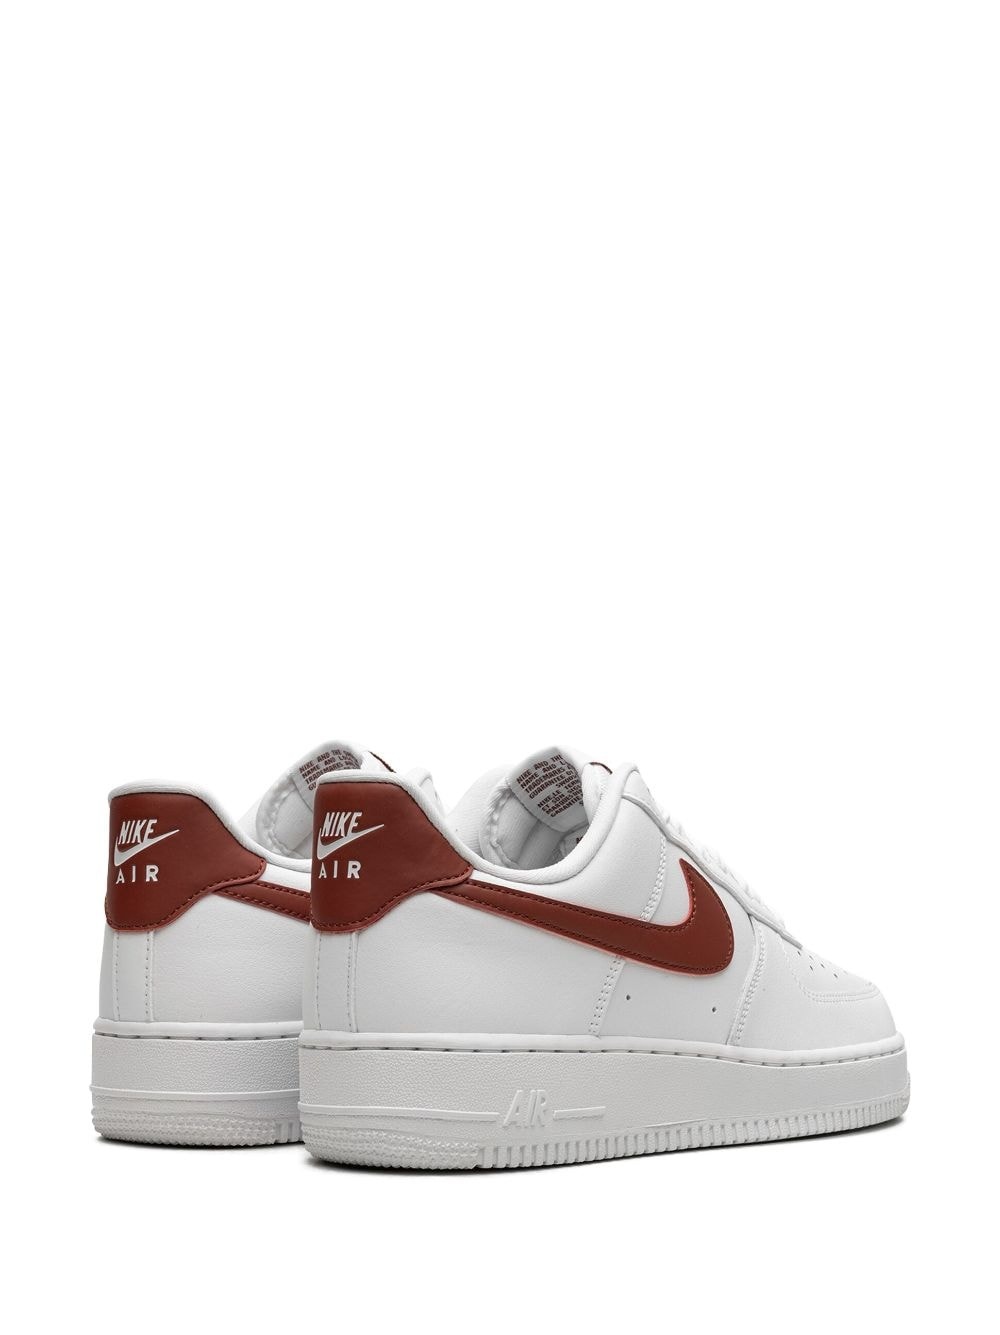 Air Force 1 '07 "White/Rugged Orange" sneakers - 3